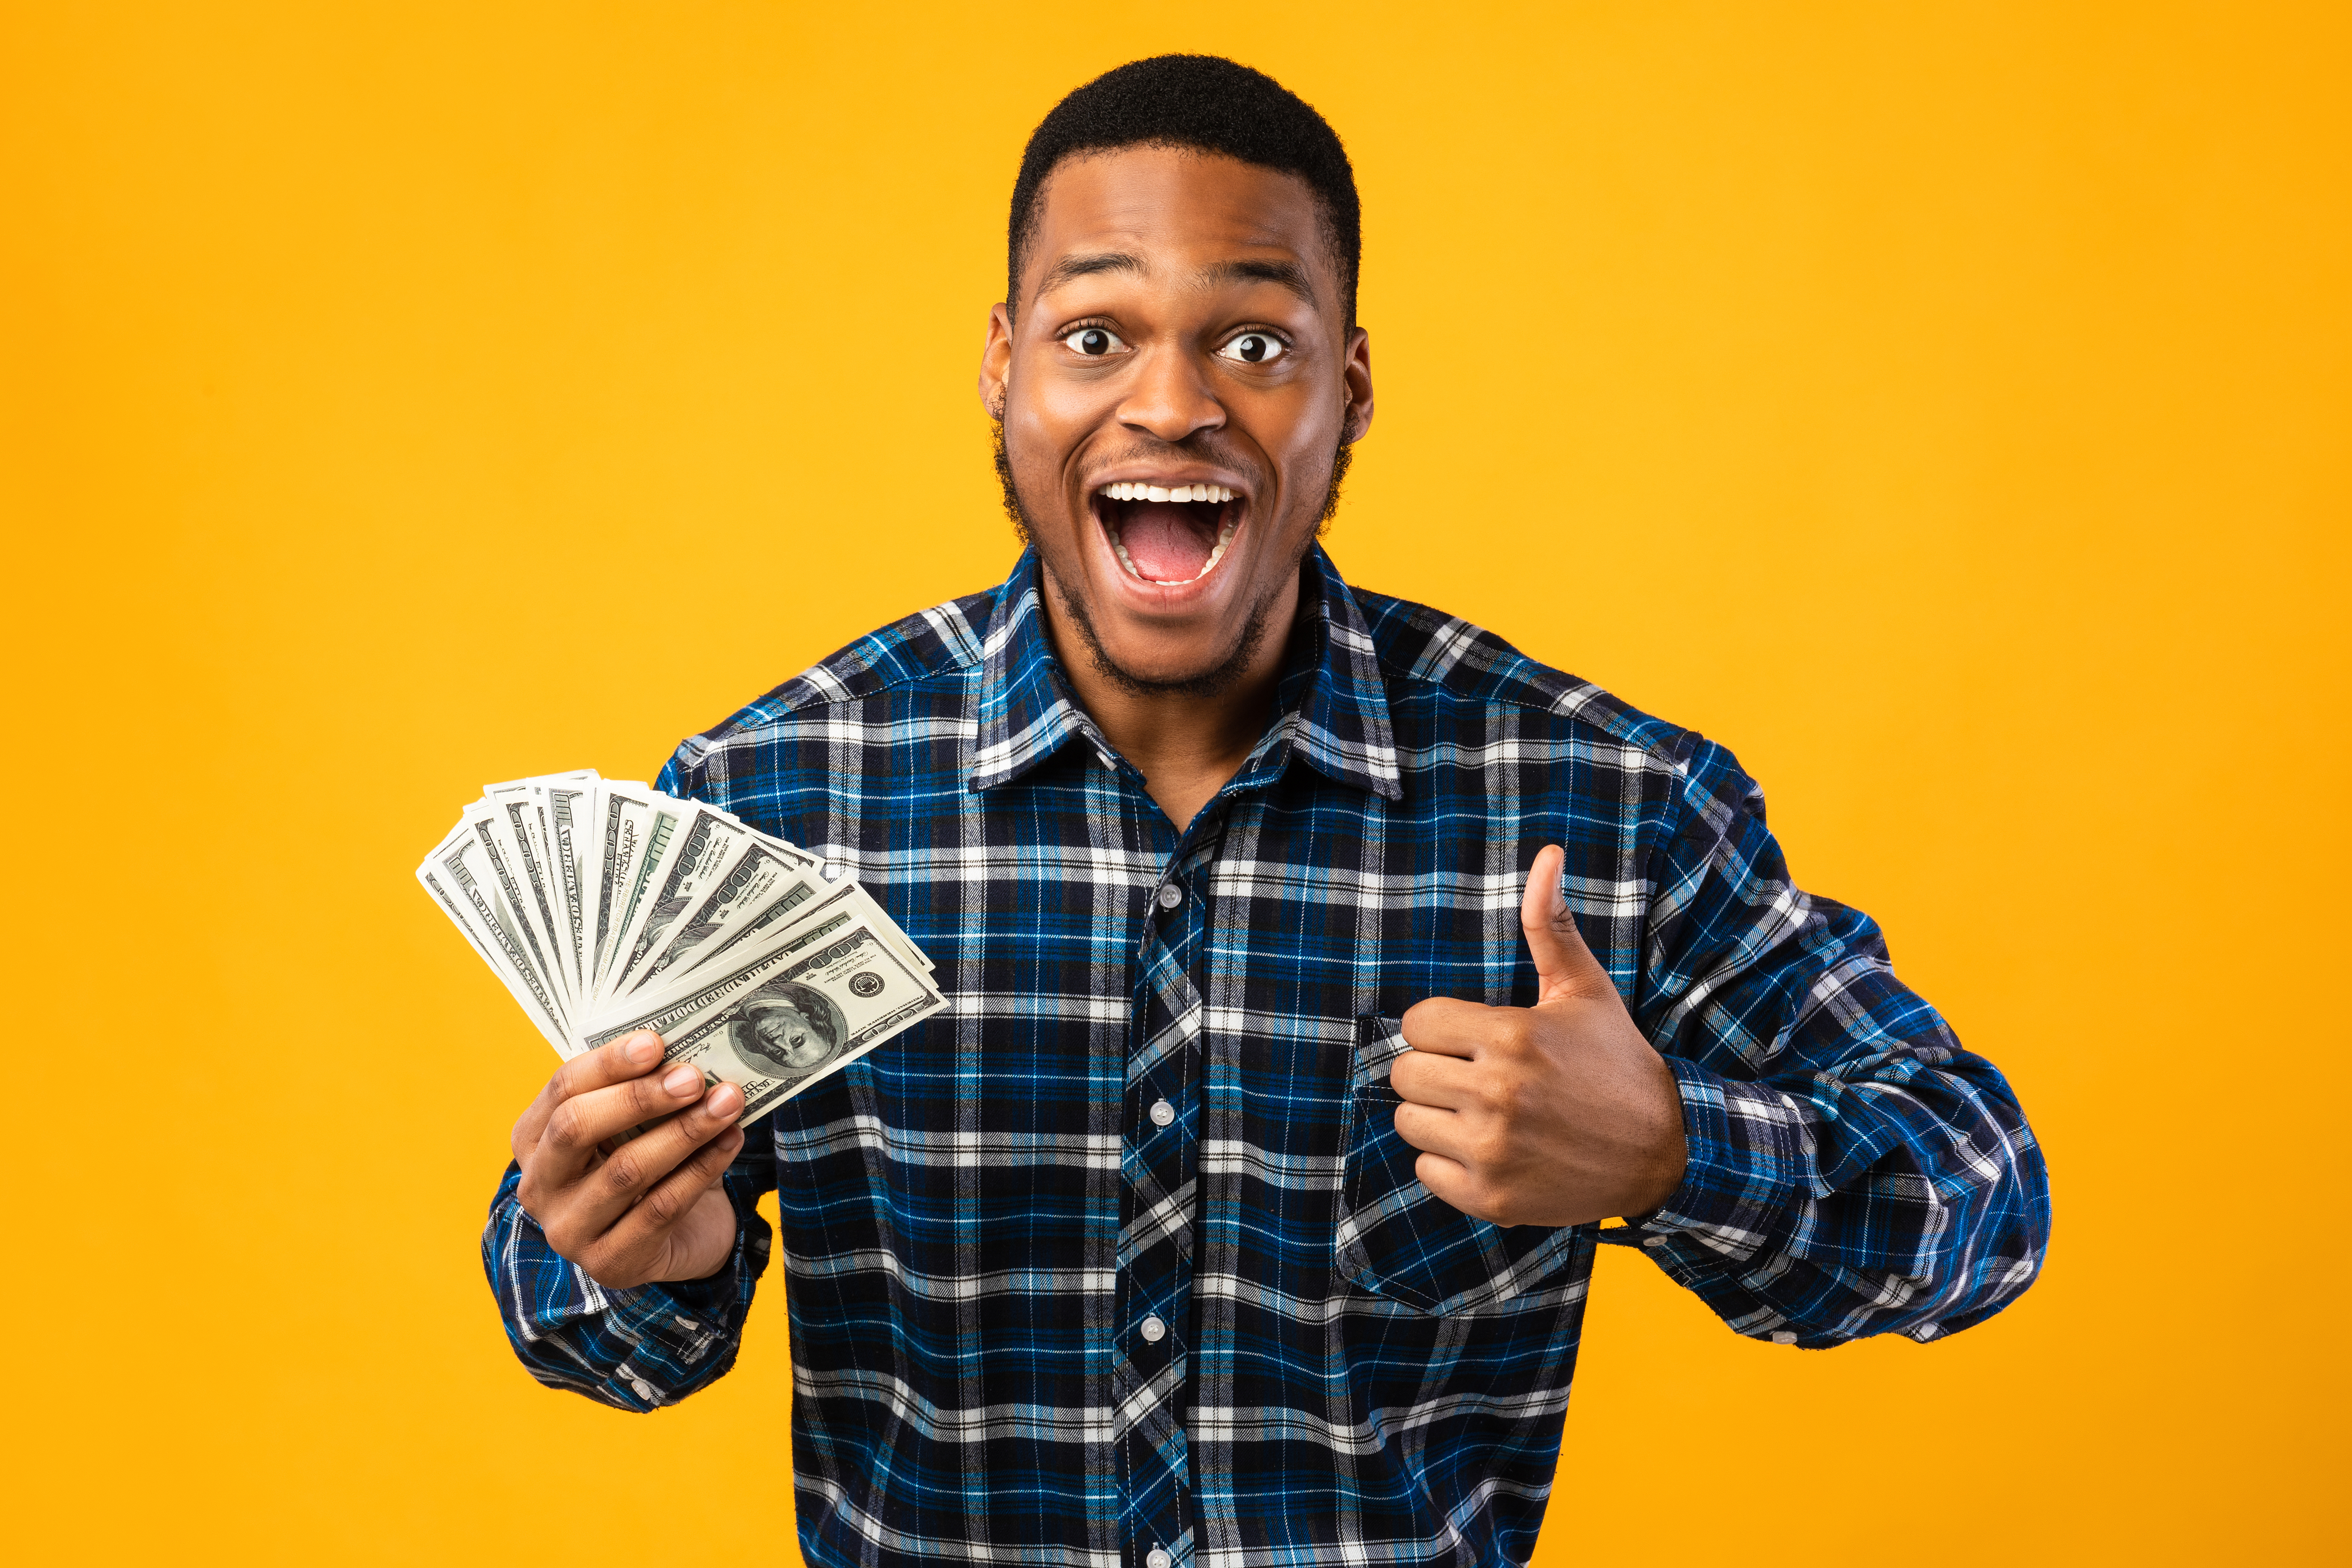 man smiling with cash in one hand, making thumbs-up gesture with the other